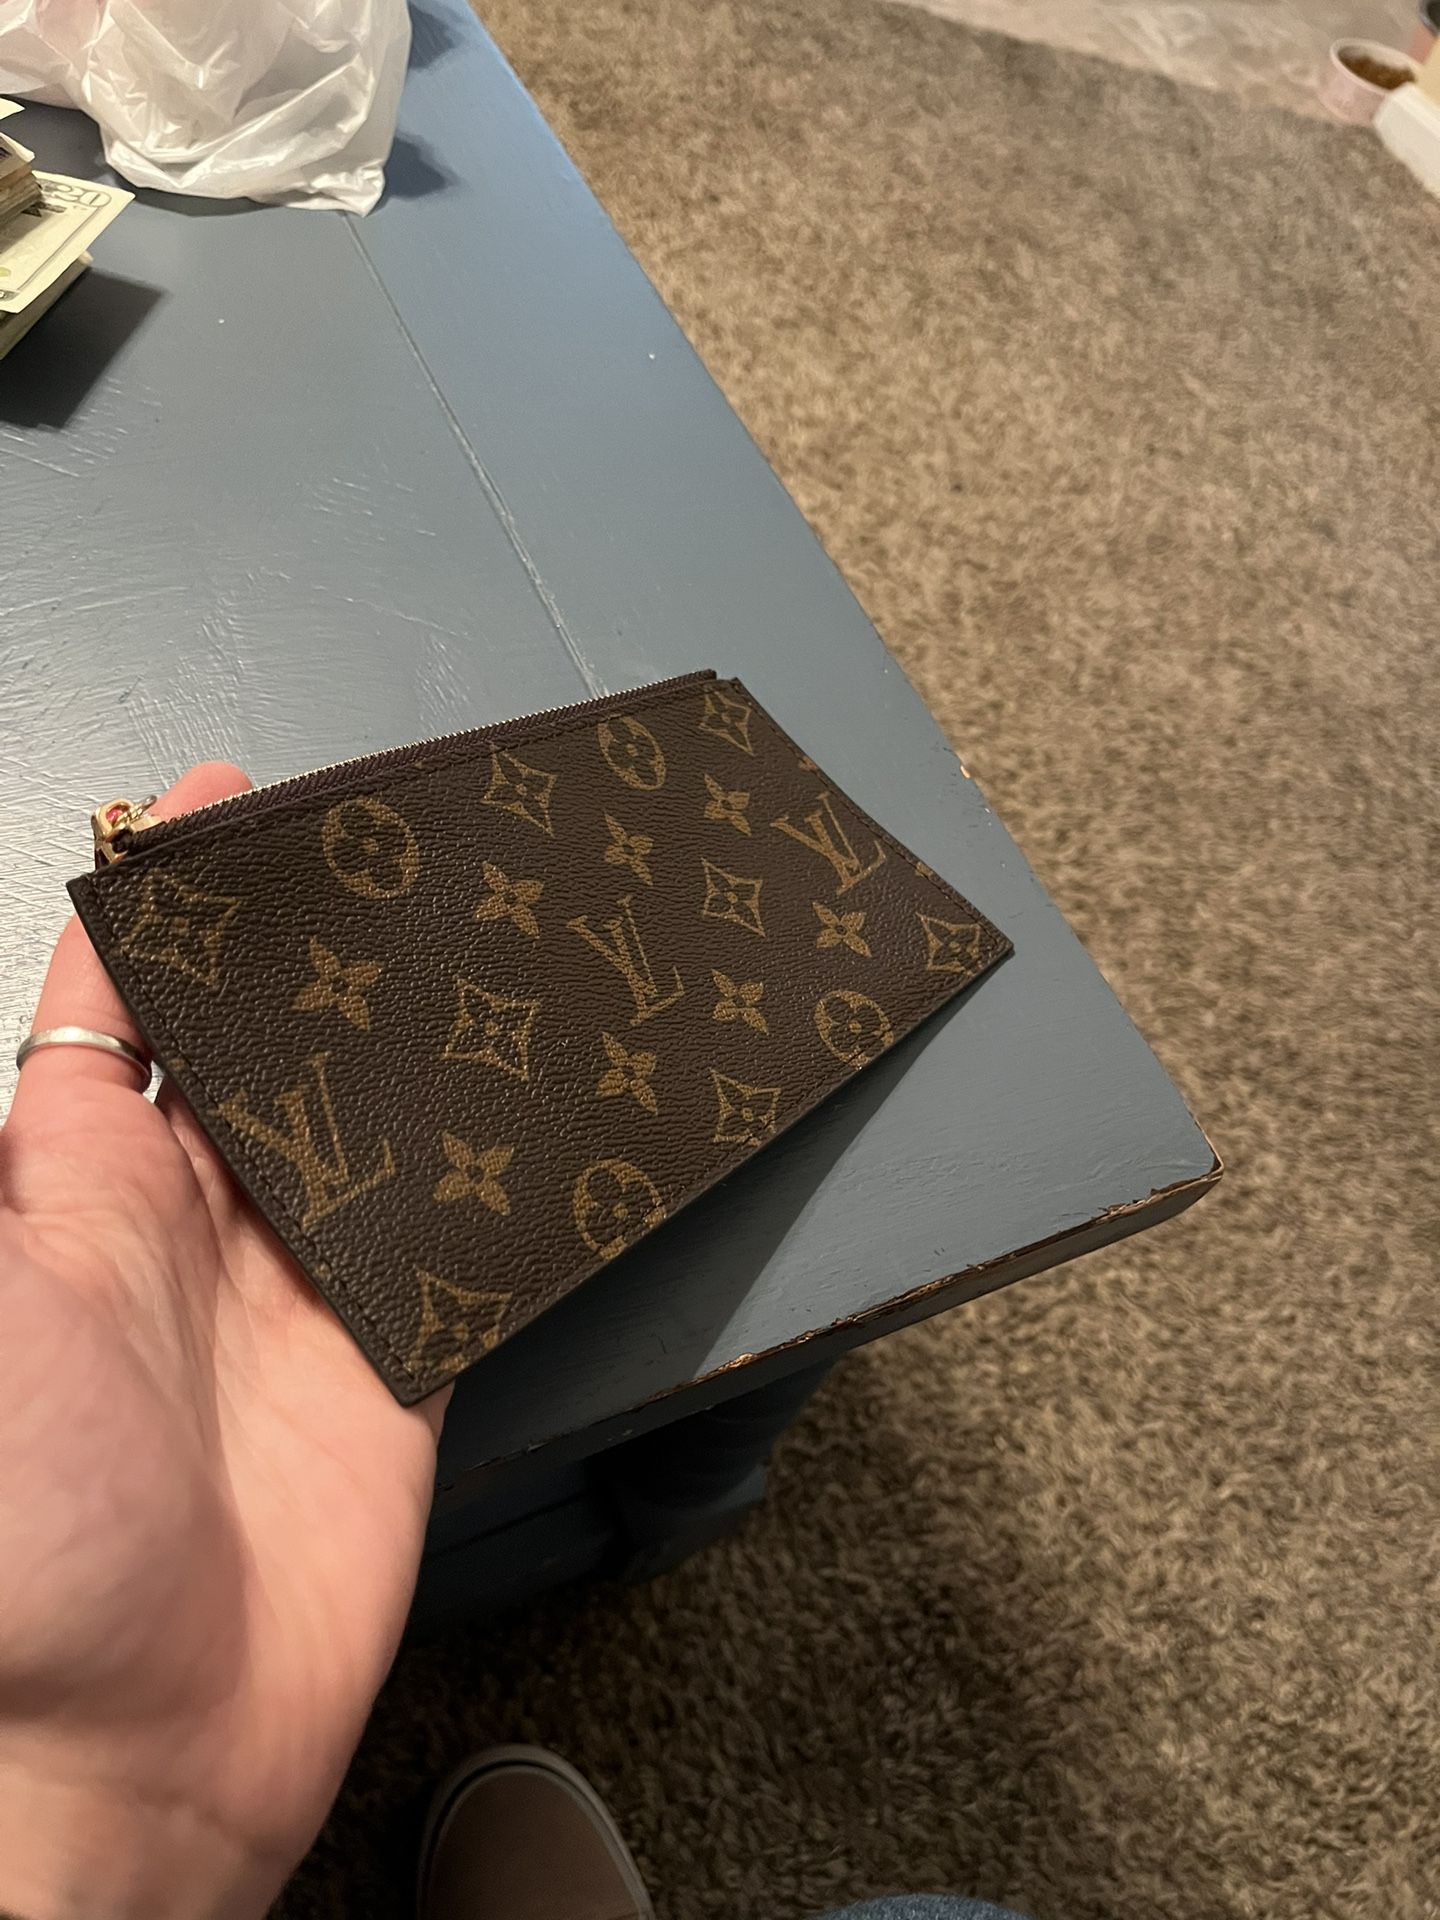 Louis Vuitton LV Wallet dupe - $25 (28% Off Retail) - From Ashley